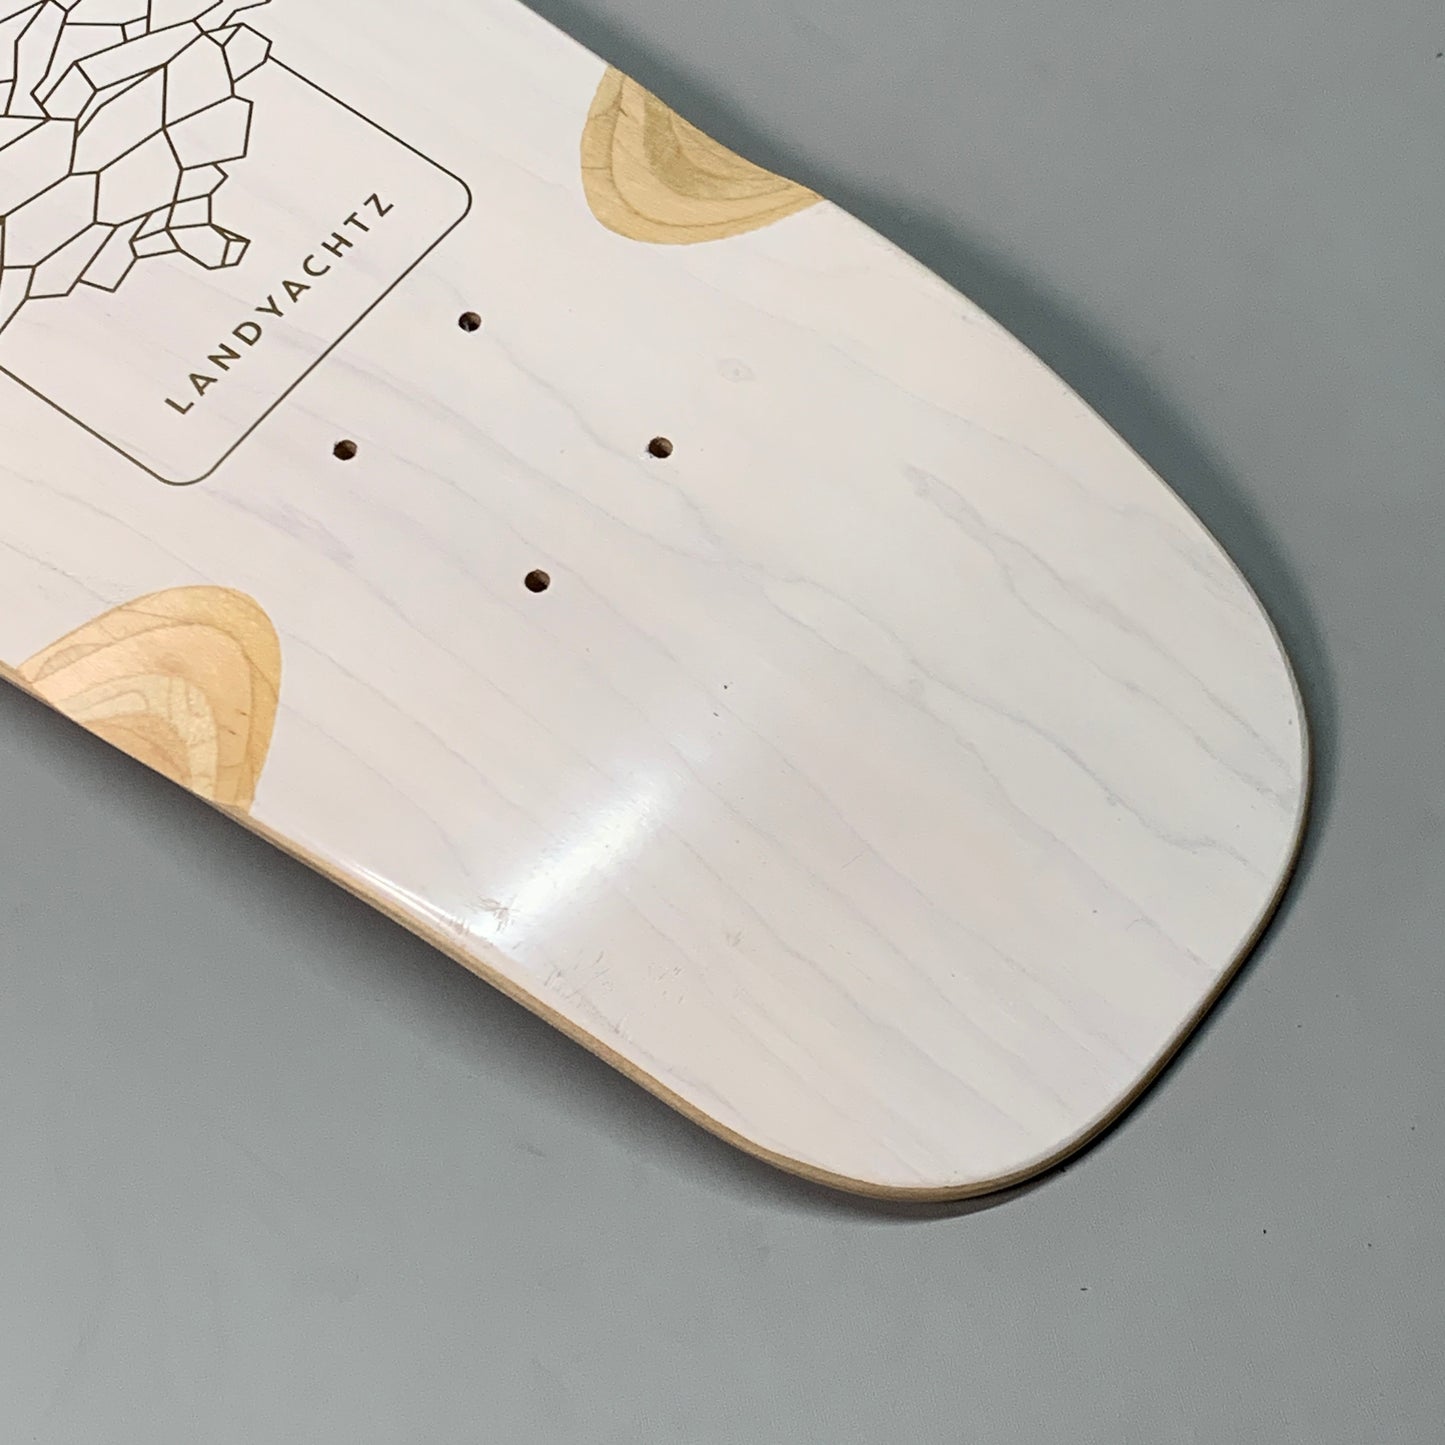 LANDYACHTZ Dinghy Blunt Longboard/Skateboard White Pinecone w/ Grip Taped Top Canadian Maple 7 Ply 29"x8.5" (New Other)